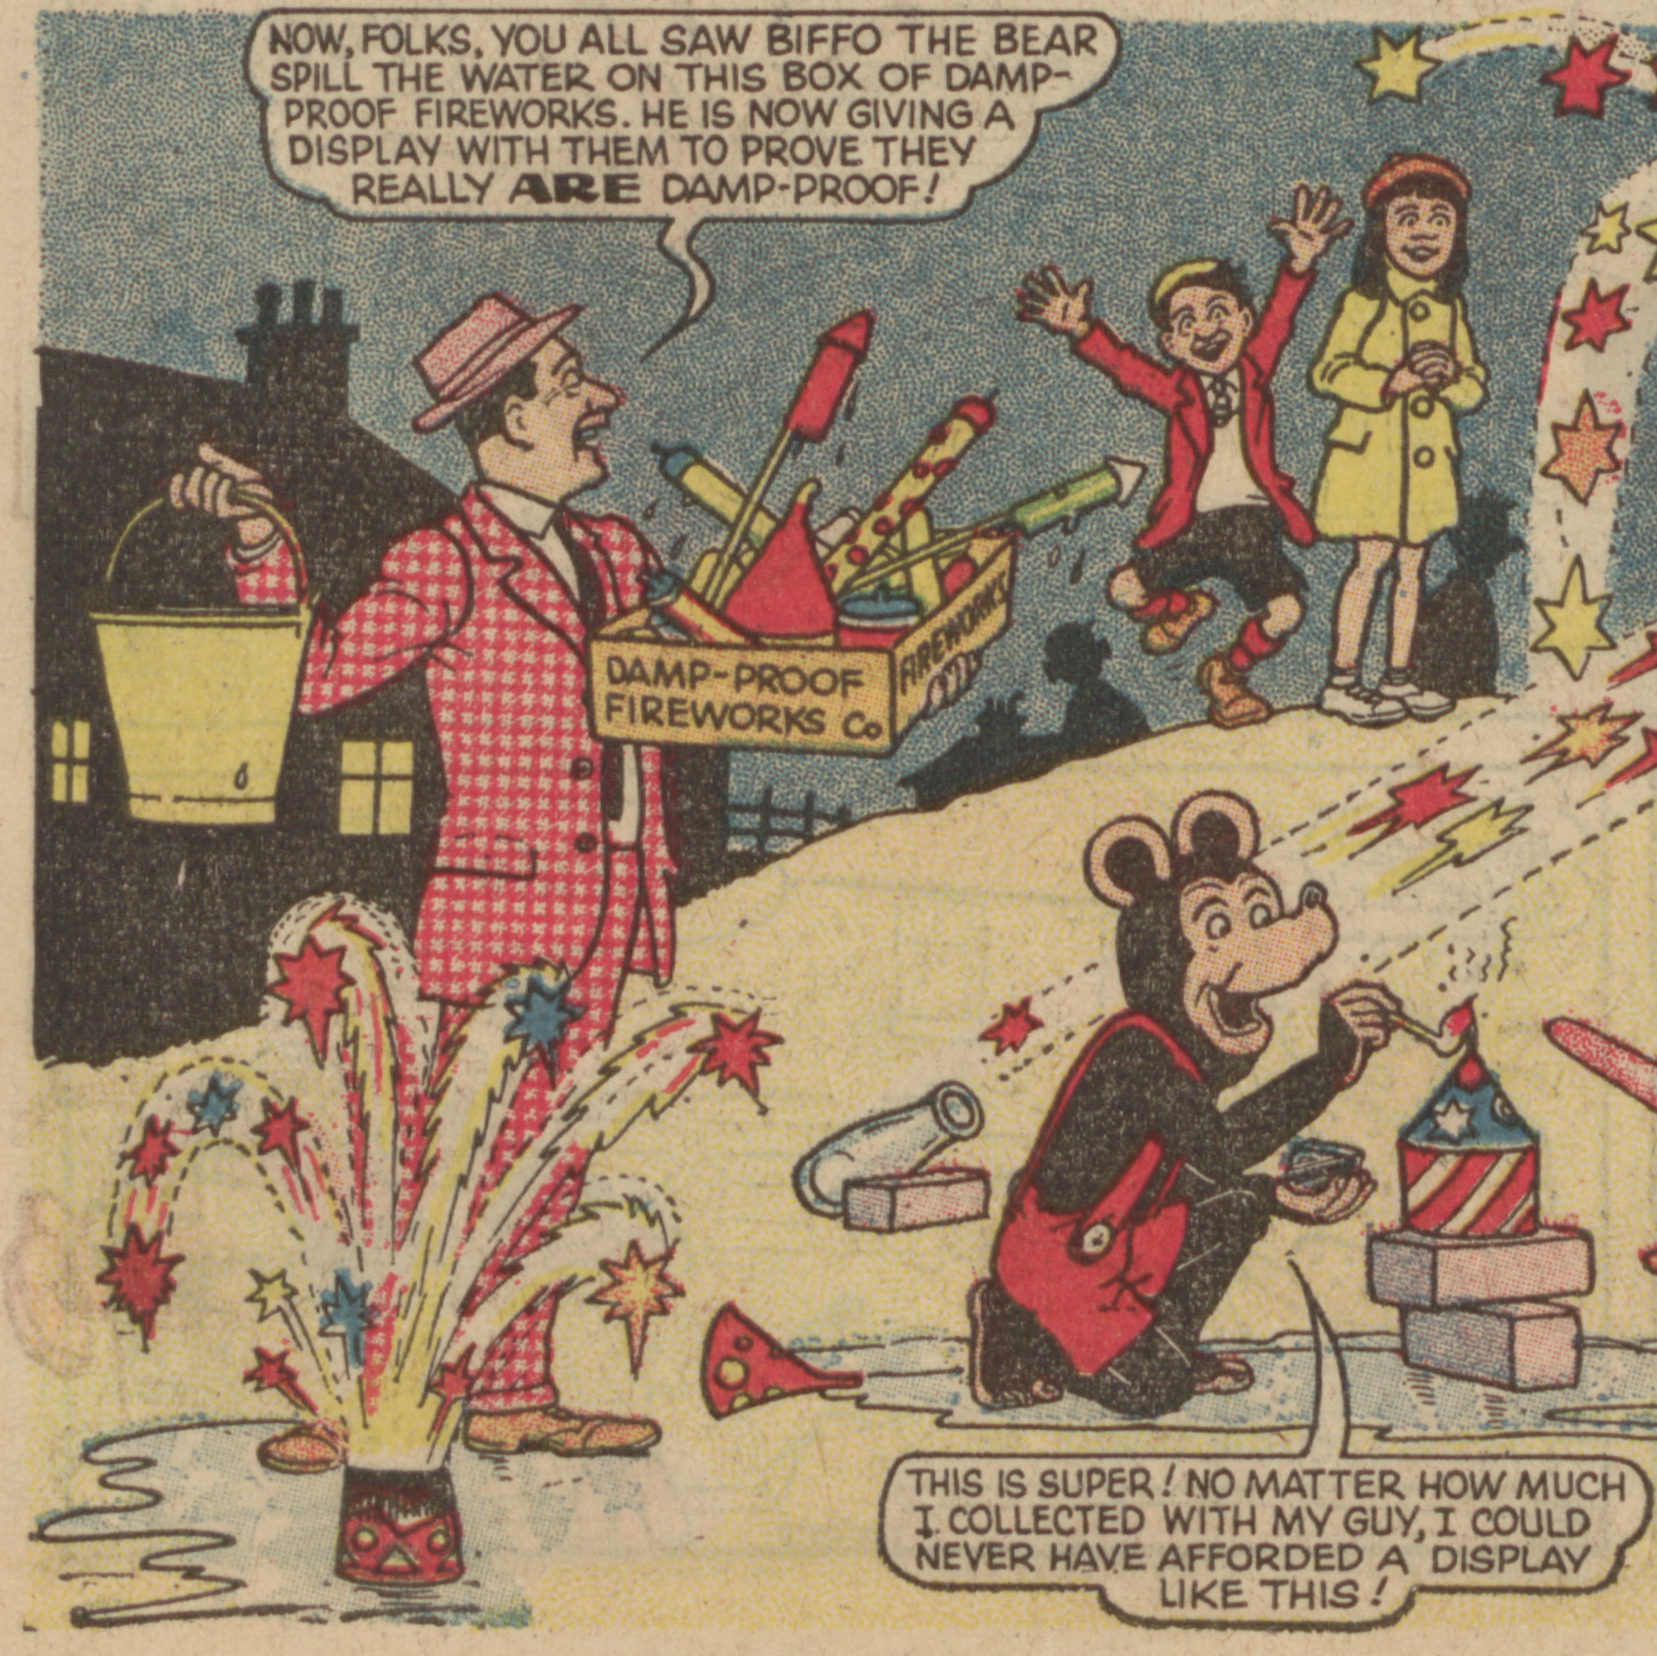 Biffo the Bear 1964 - Fireworks at play!